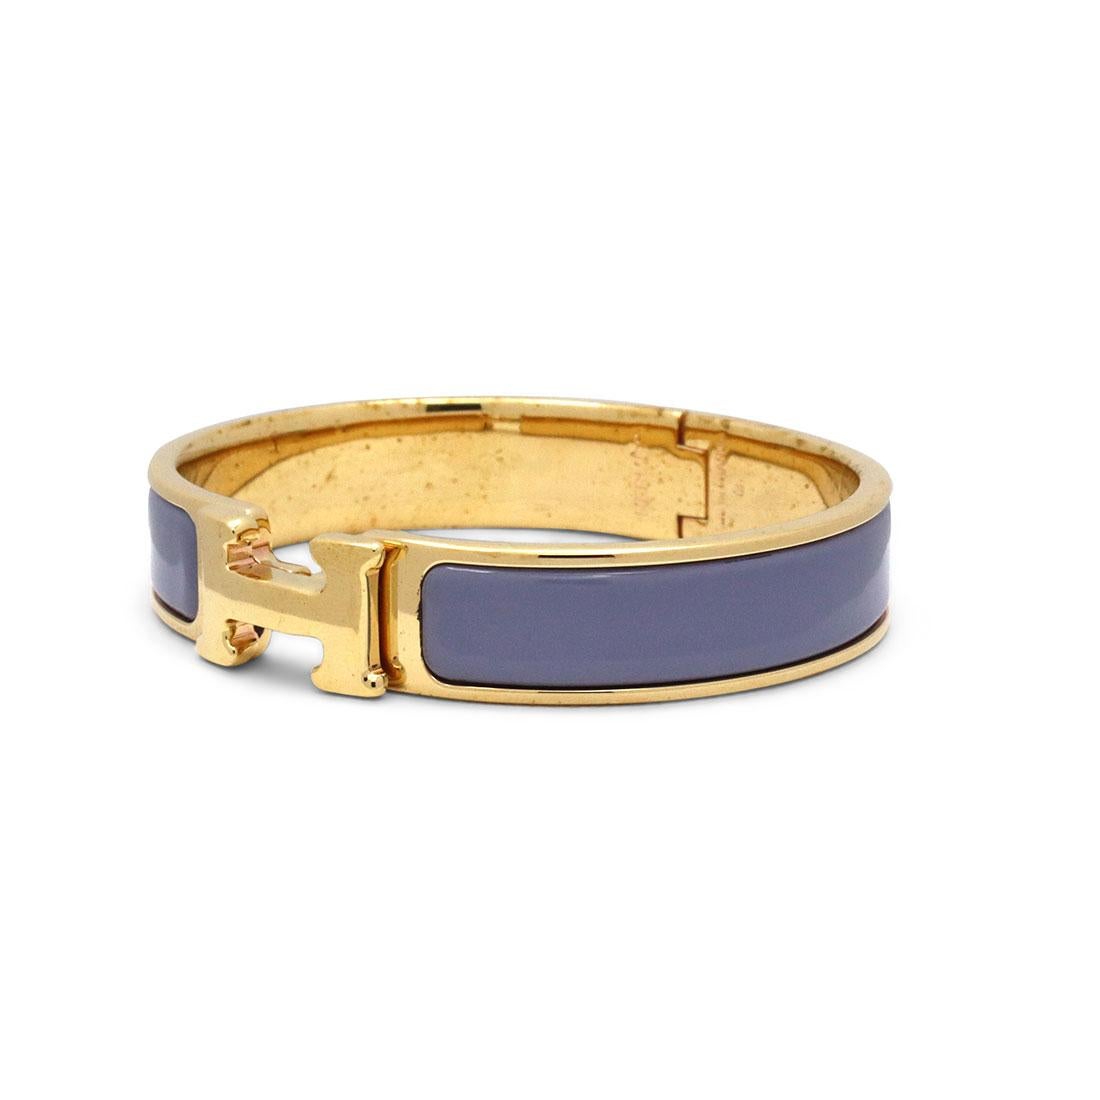 Authentic Hermes Clic H bangle crafted in gold plated hardware enclosed around parme colored enamel. This classic bangle features Hermes signature 'H' stamp on the bangle as the closure and fits up to a 5 1/2 inch wrist. Signed Hermès, Made in